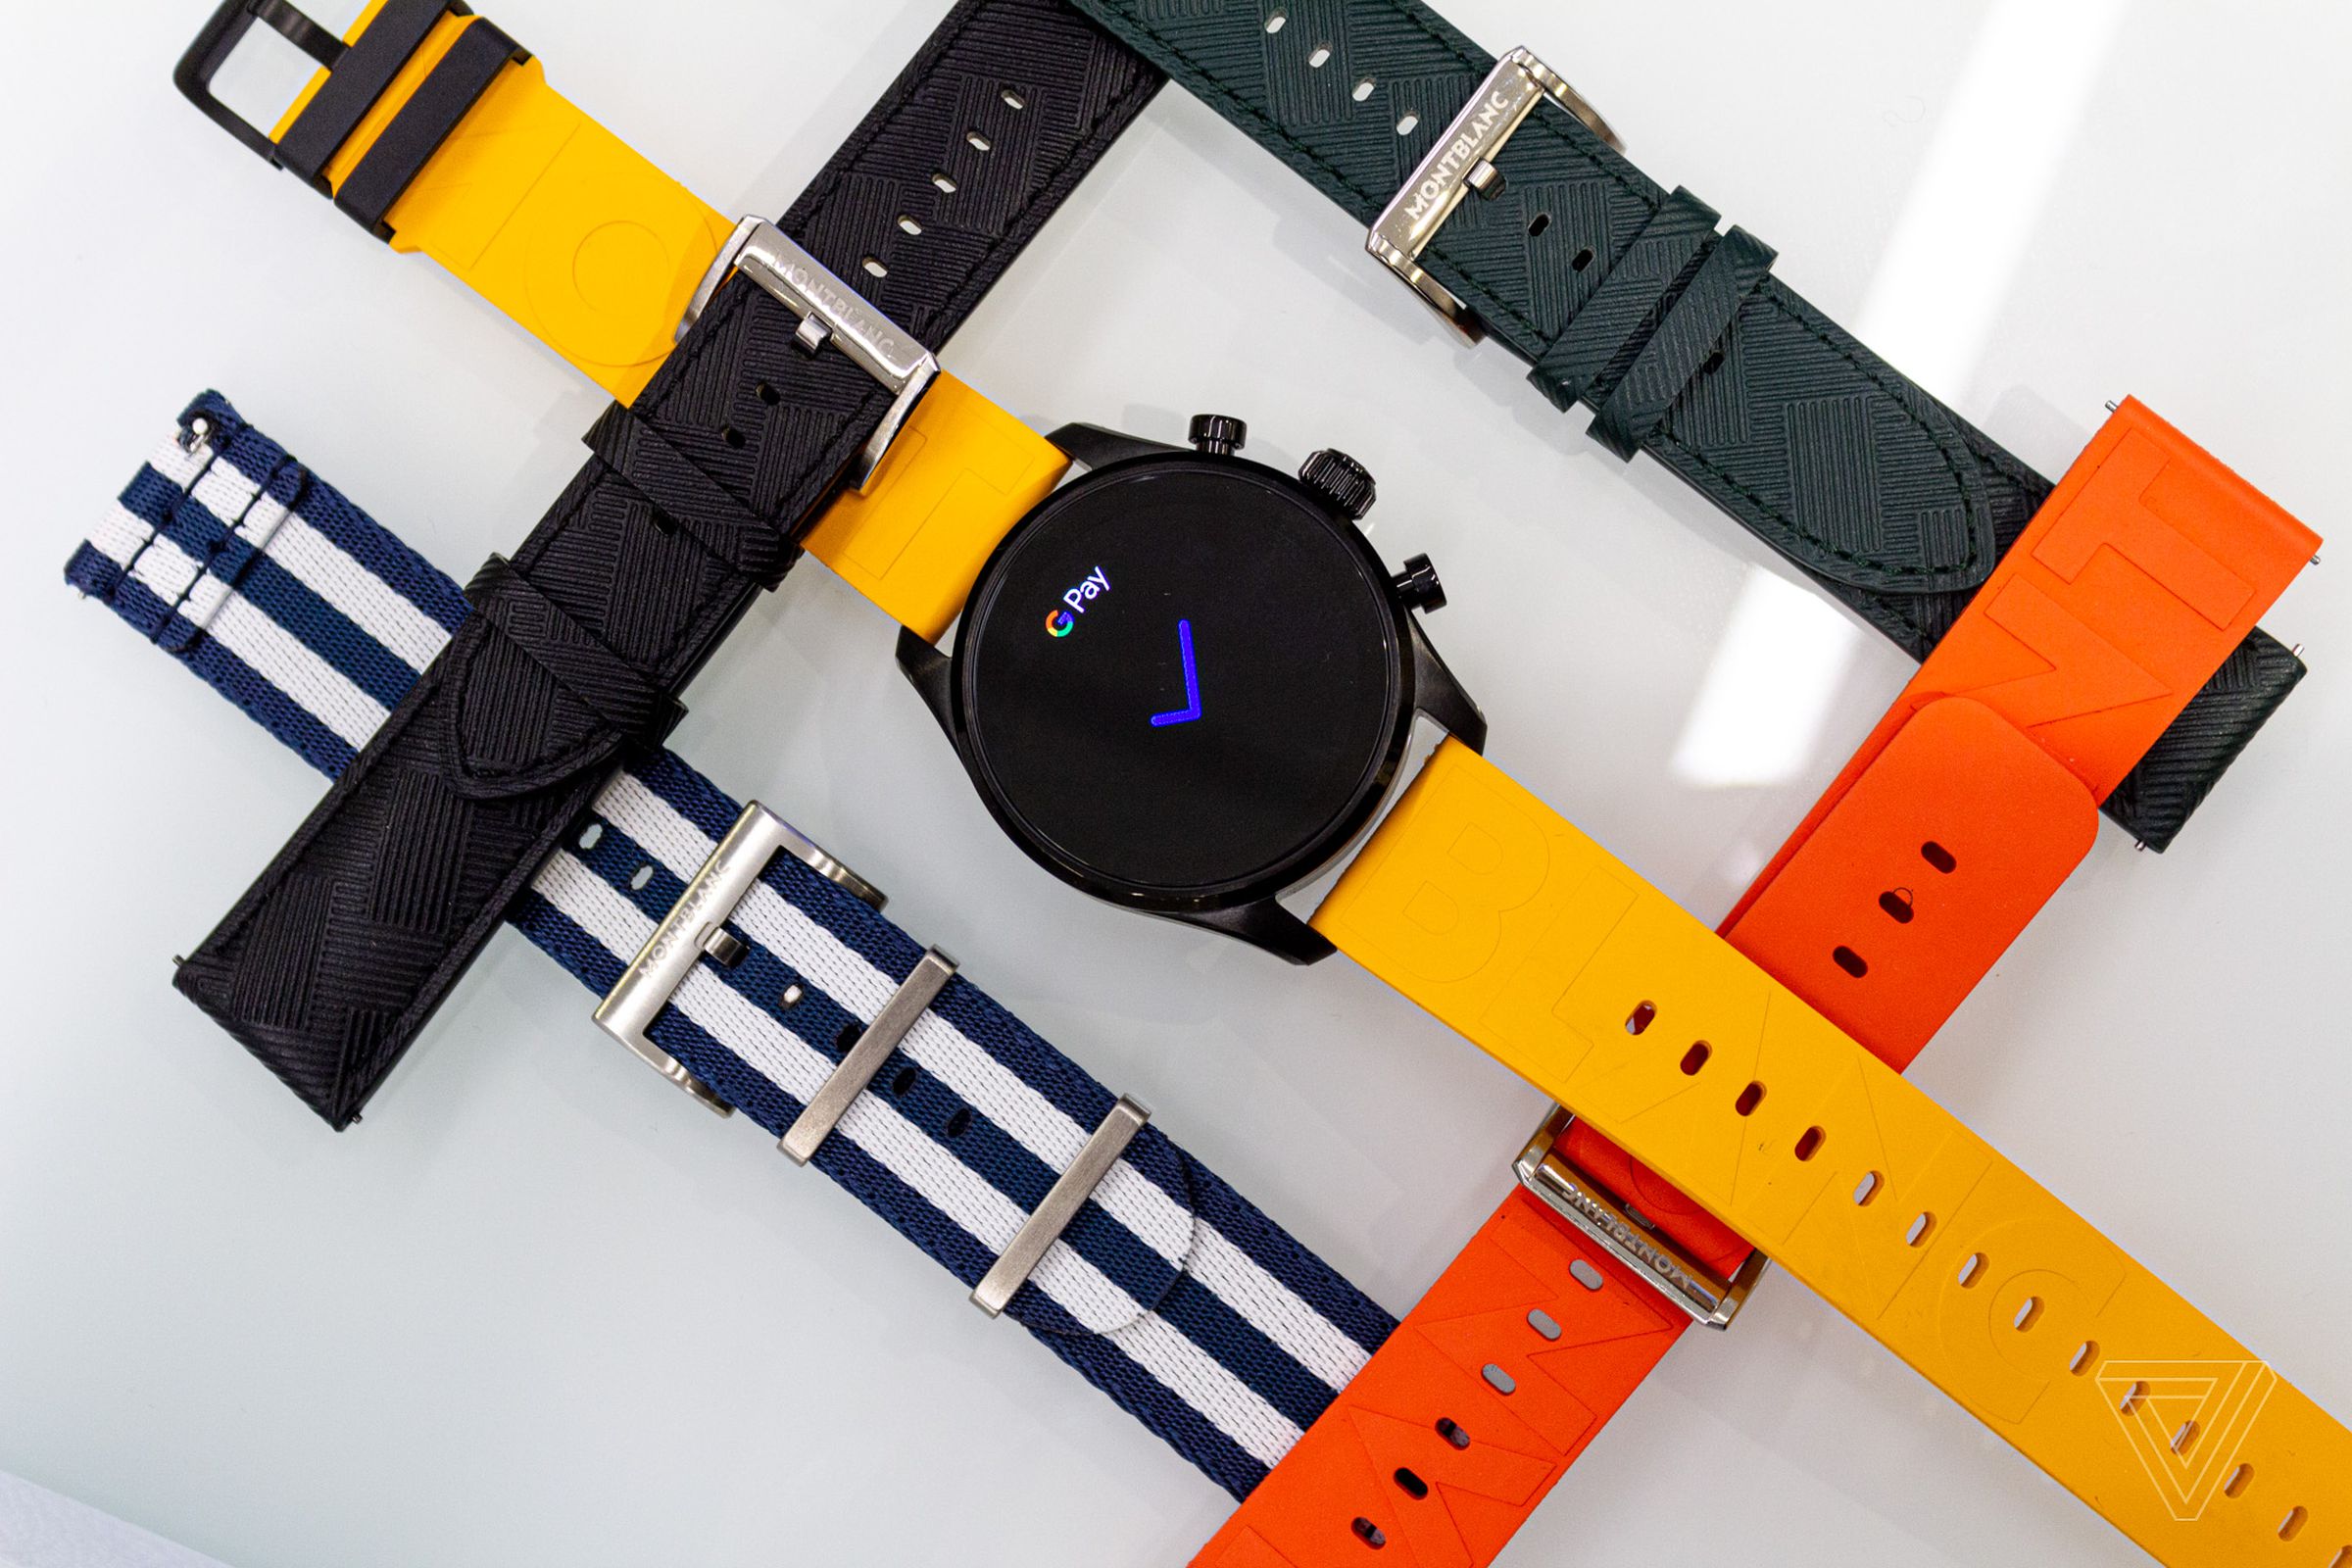 Montblanc Summit 3 showing the Google Pay screen alongside several alternative straps